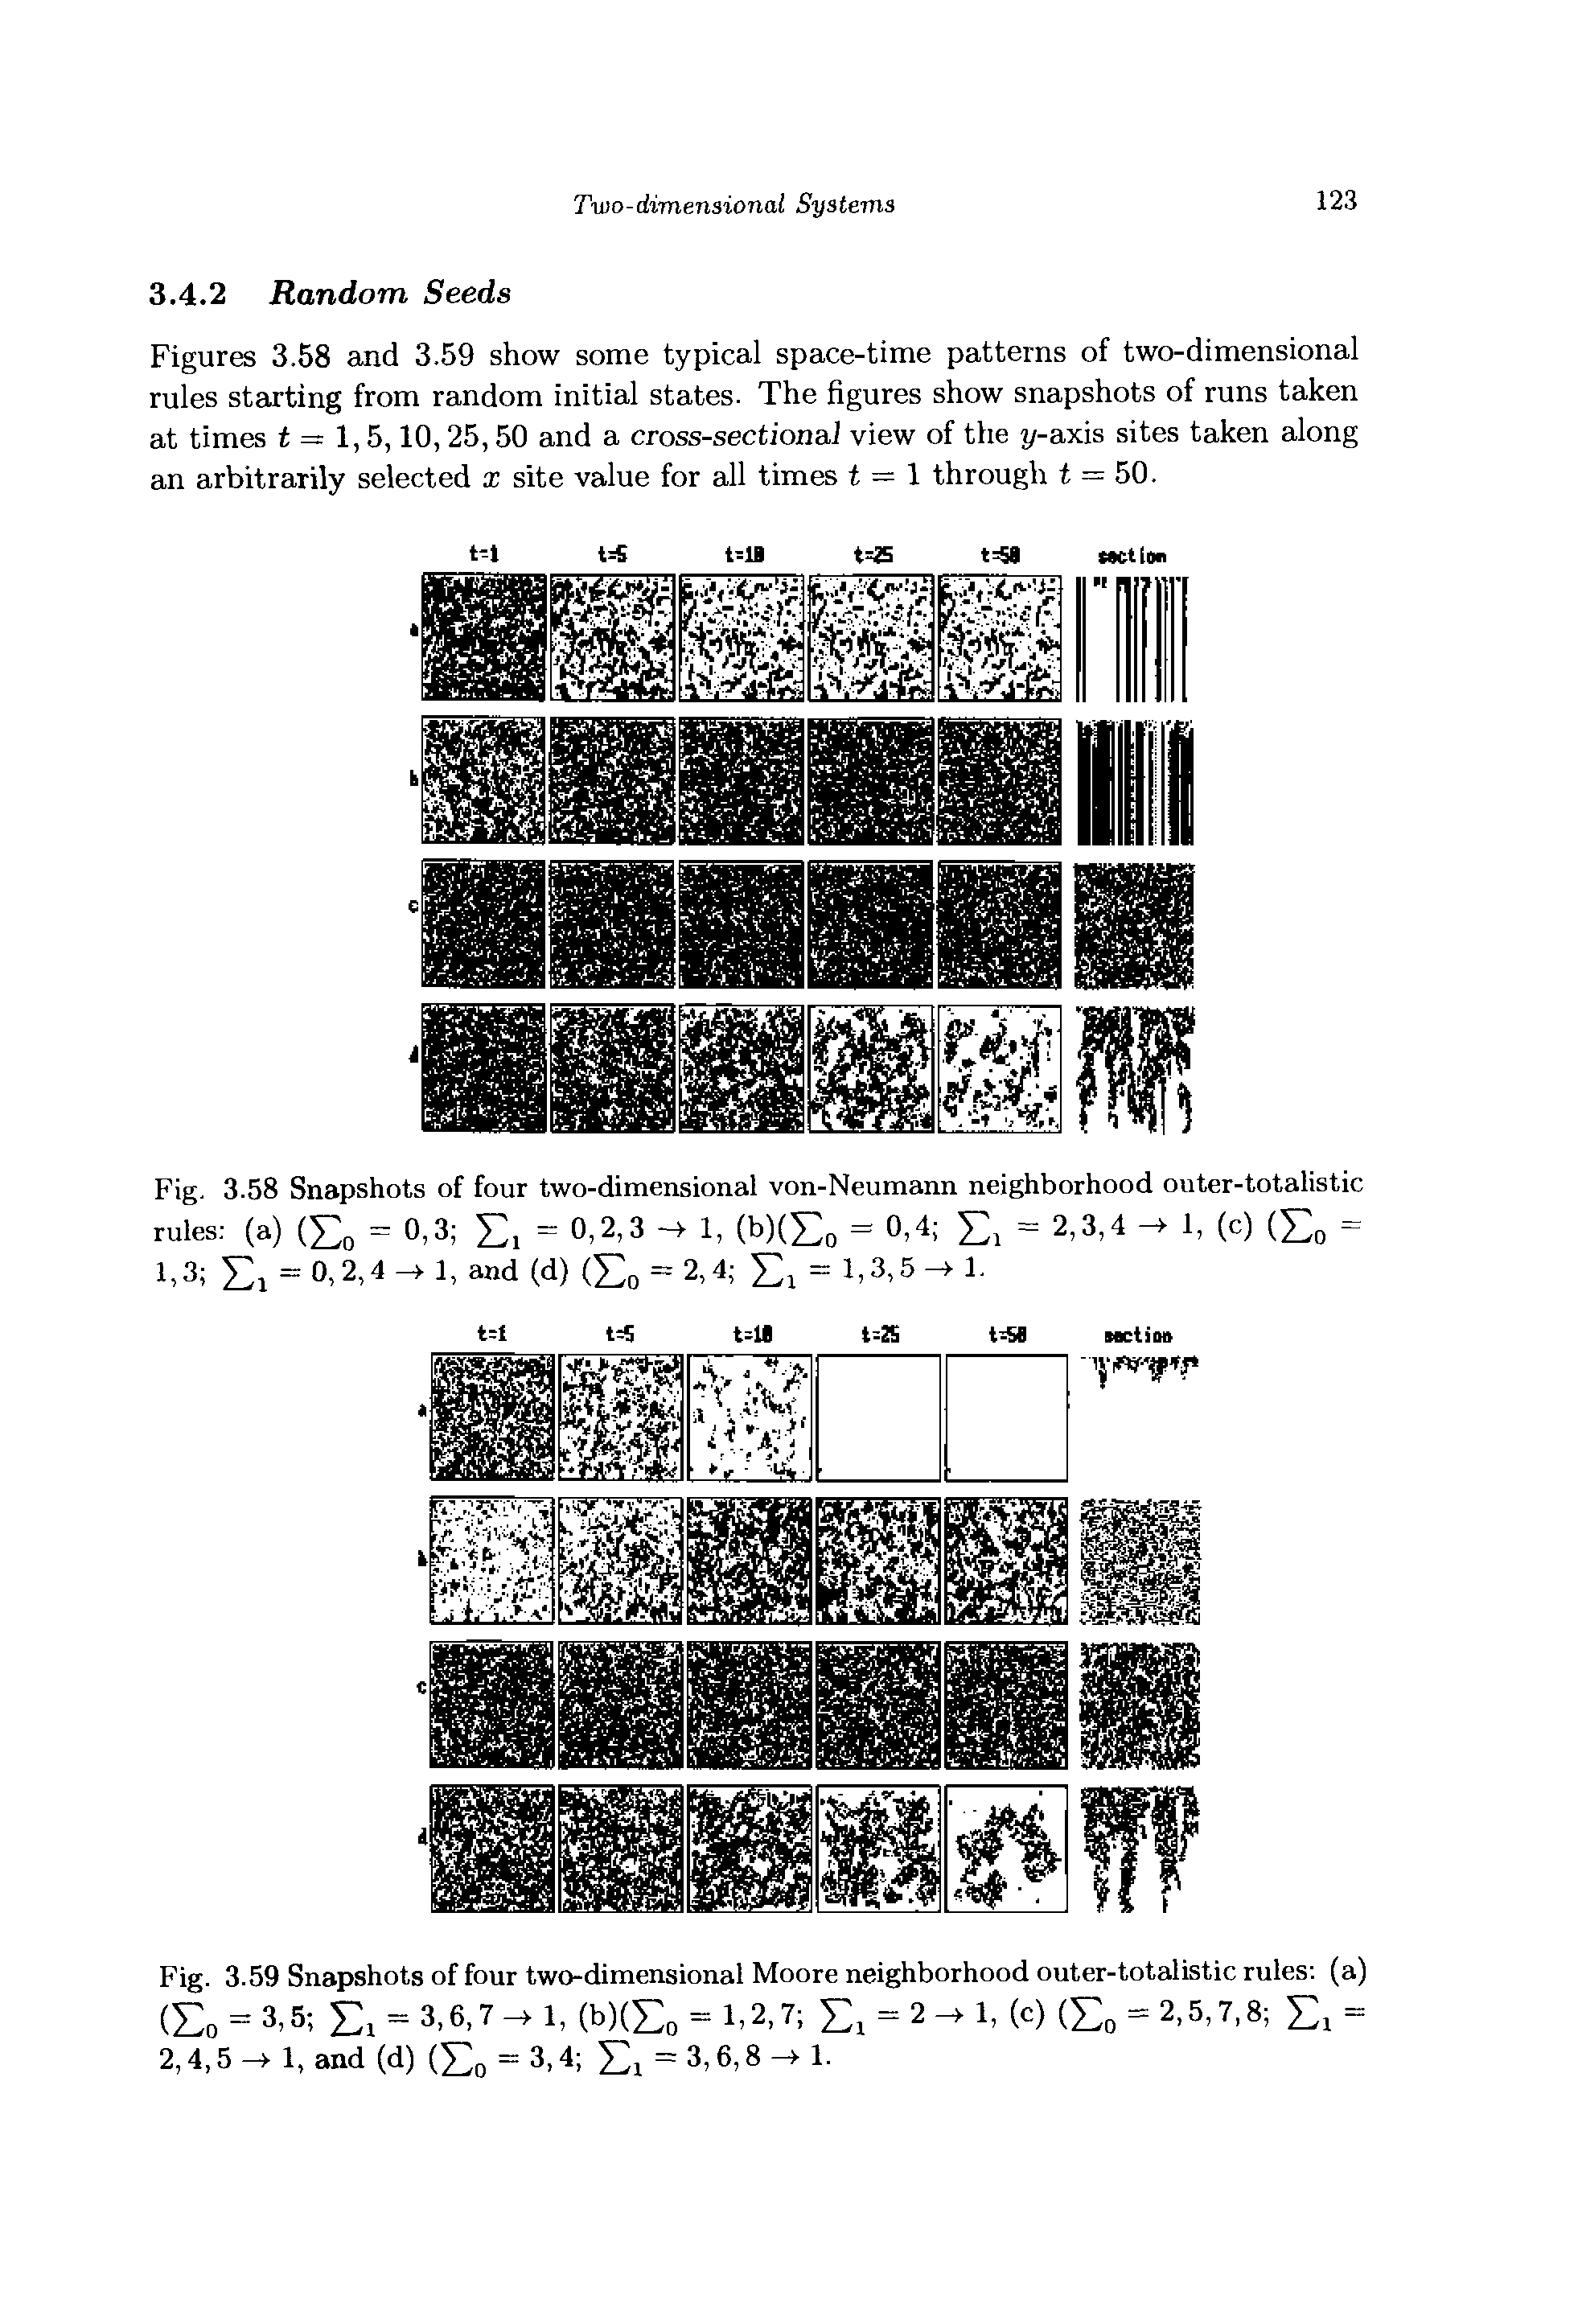 Figures 3.58 and 3.59 show some typical space-time patterns of two-dimensional rules starting from random initial states. The figures show snapshots of runs taken at times i = 1,5,10,25,50 and a cross-sectional view of the y-axis sites taken along an arbitrarily selected x site value for all times t = 1 through t = 50.